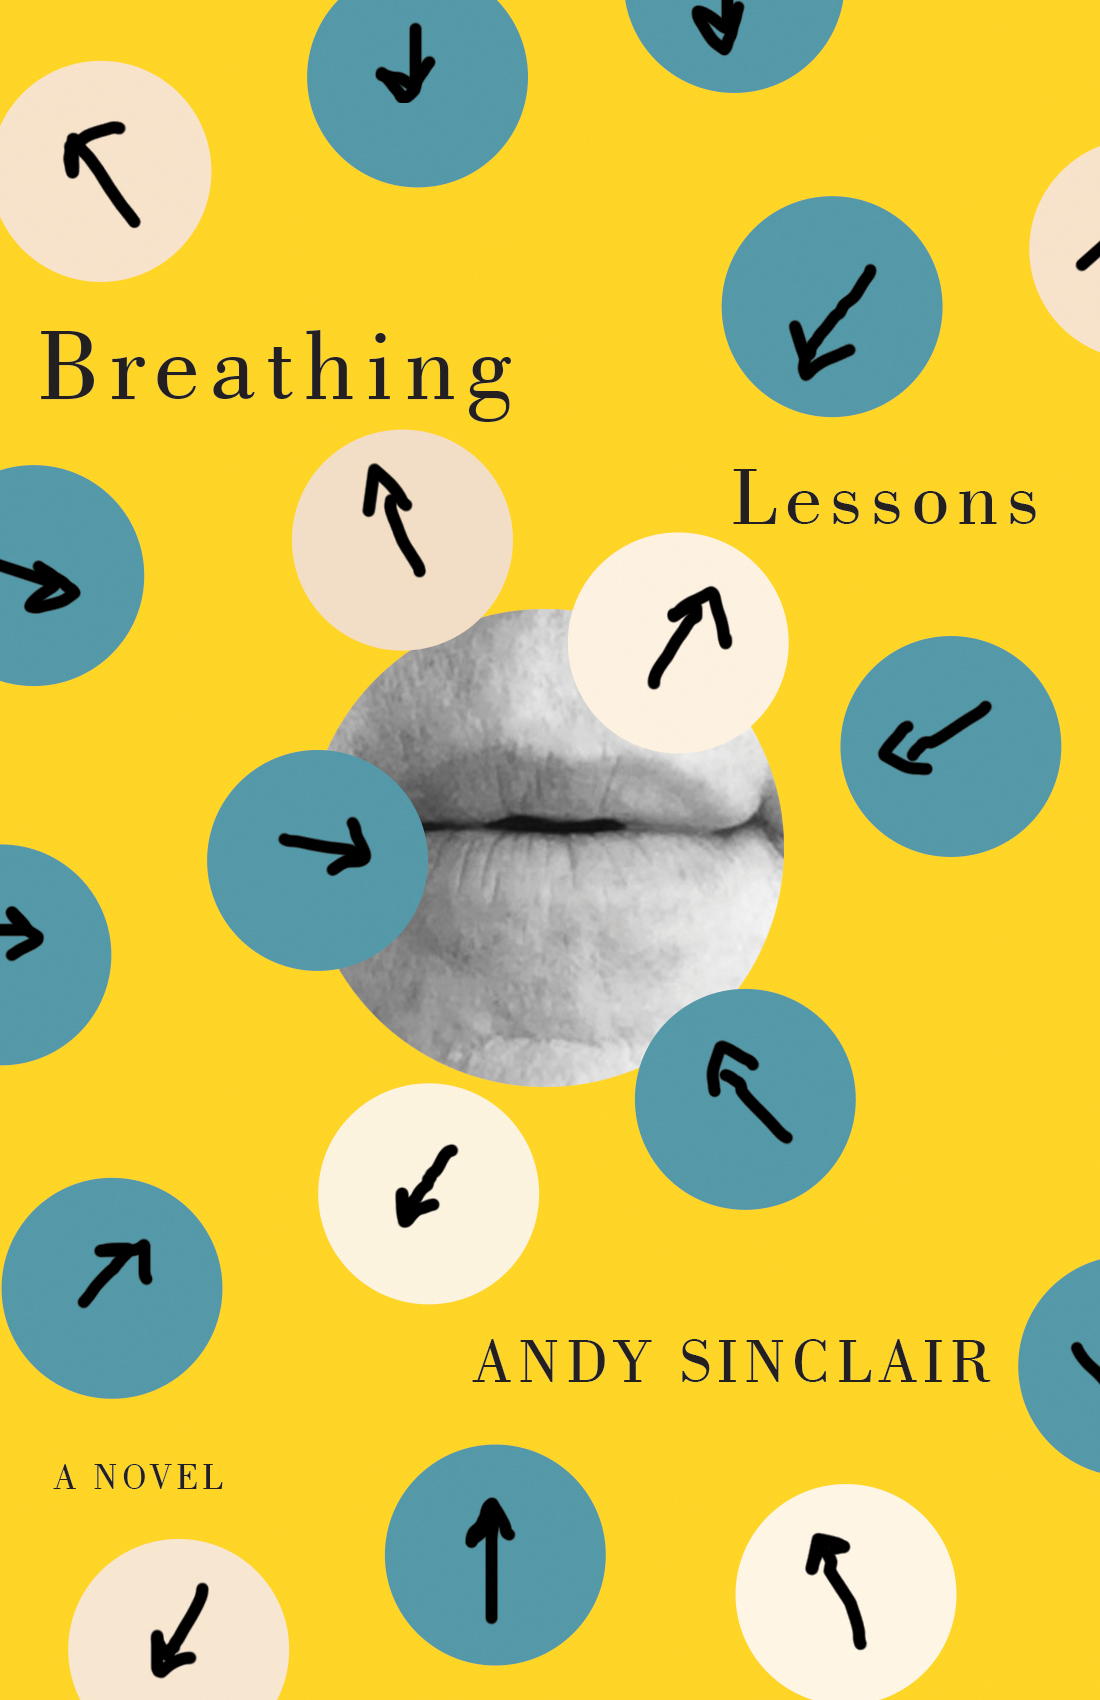 Lessons In Breathing While Gay A Review Of Andy Sinclair S Breathing Lessons Plenitude Magazine